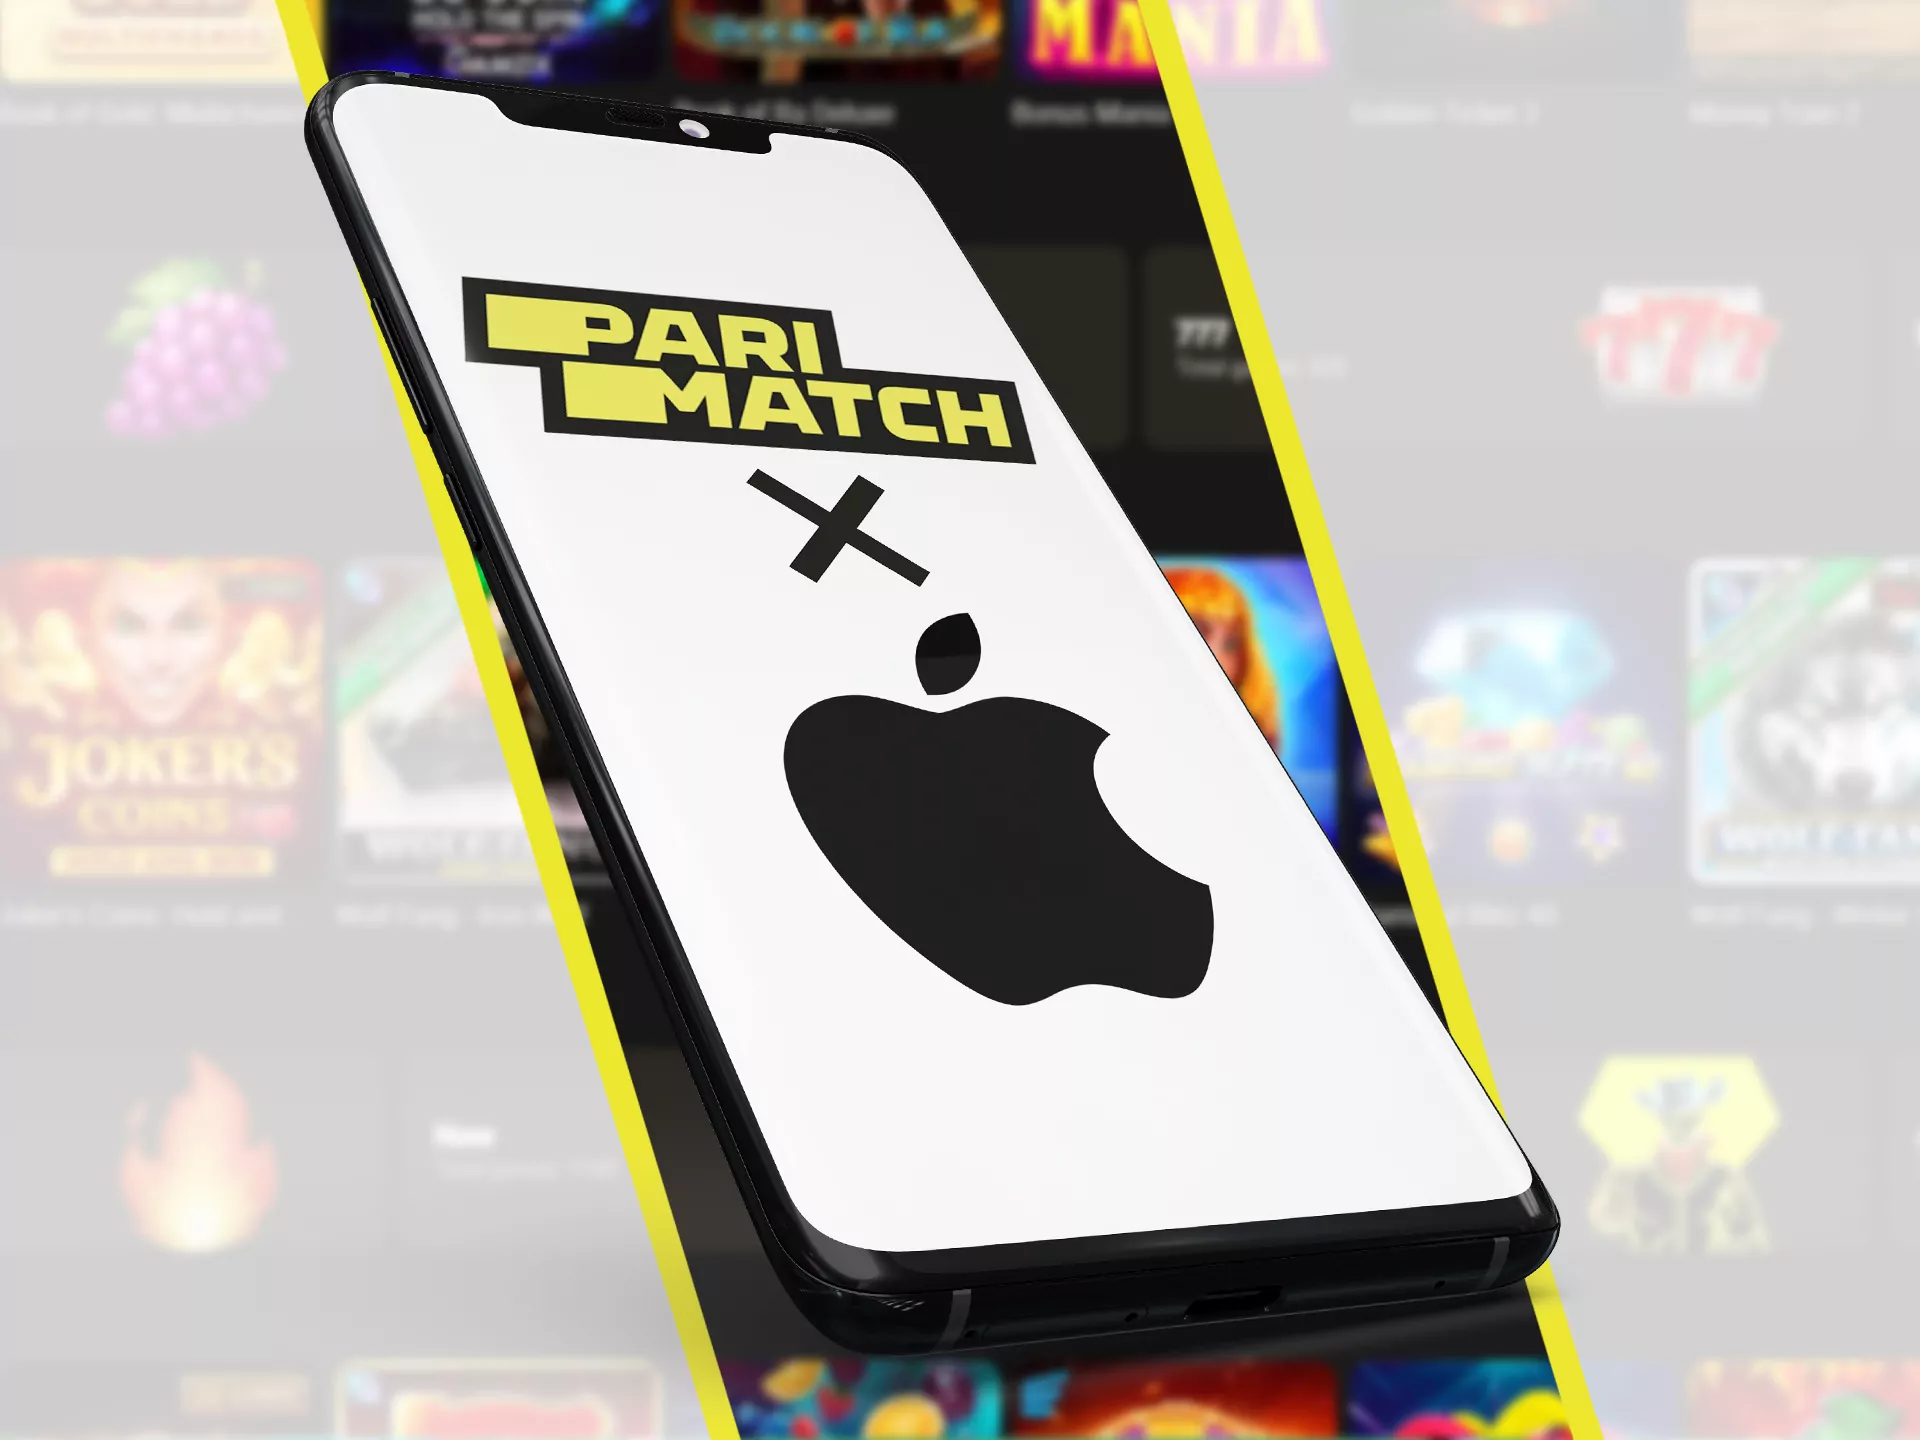 Win big prizes at Parimatch with your iphone.